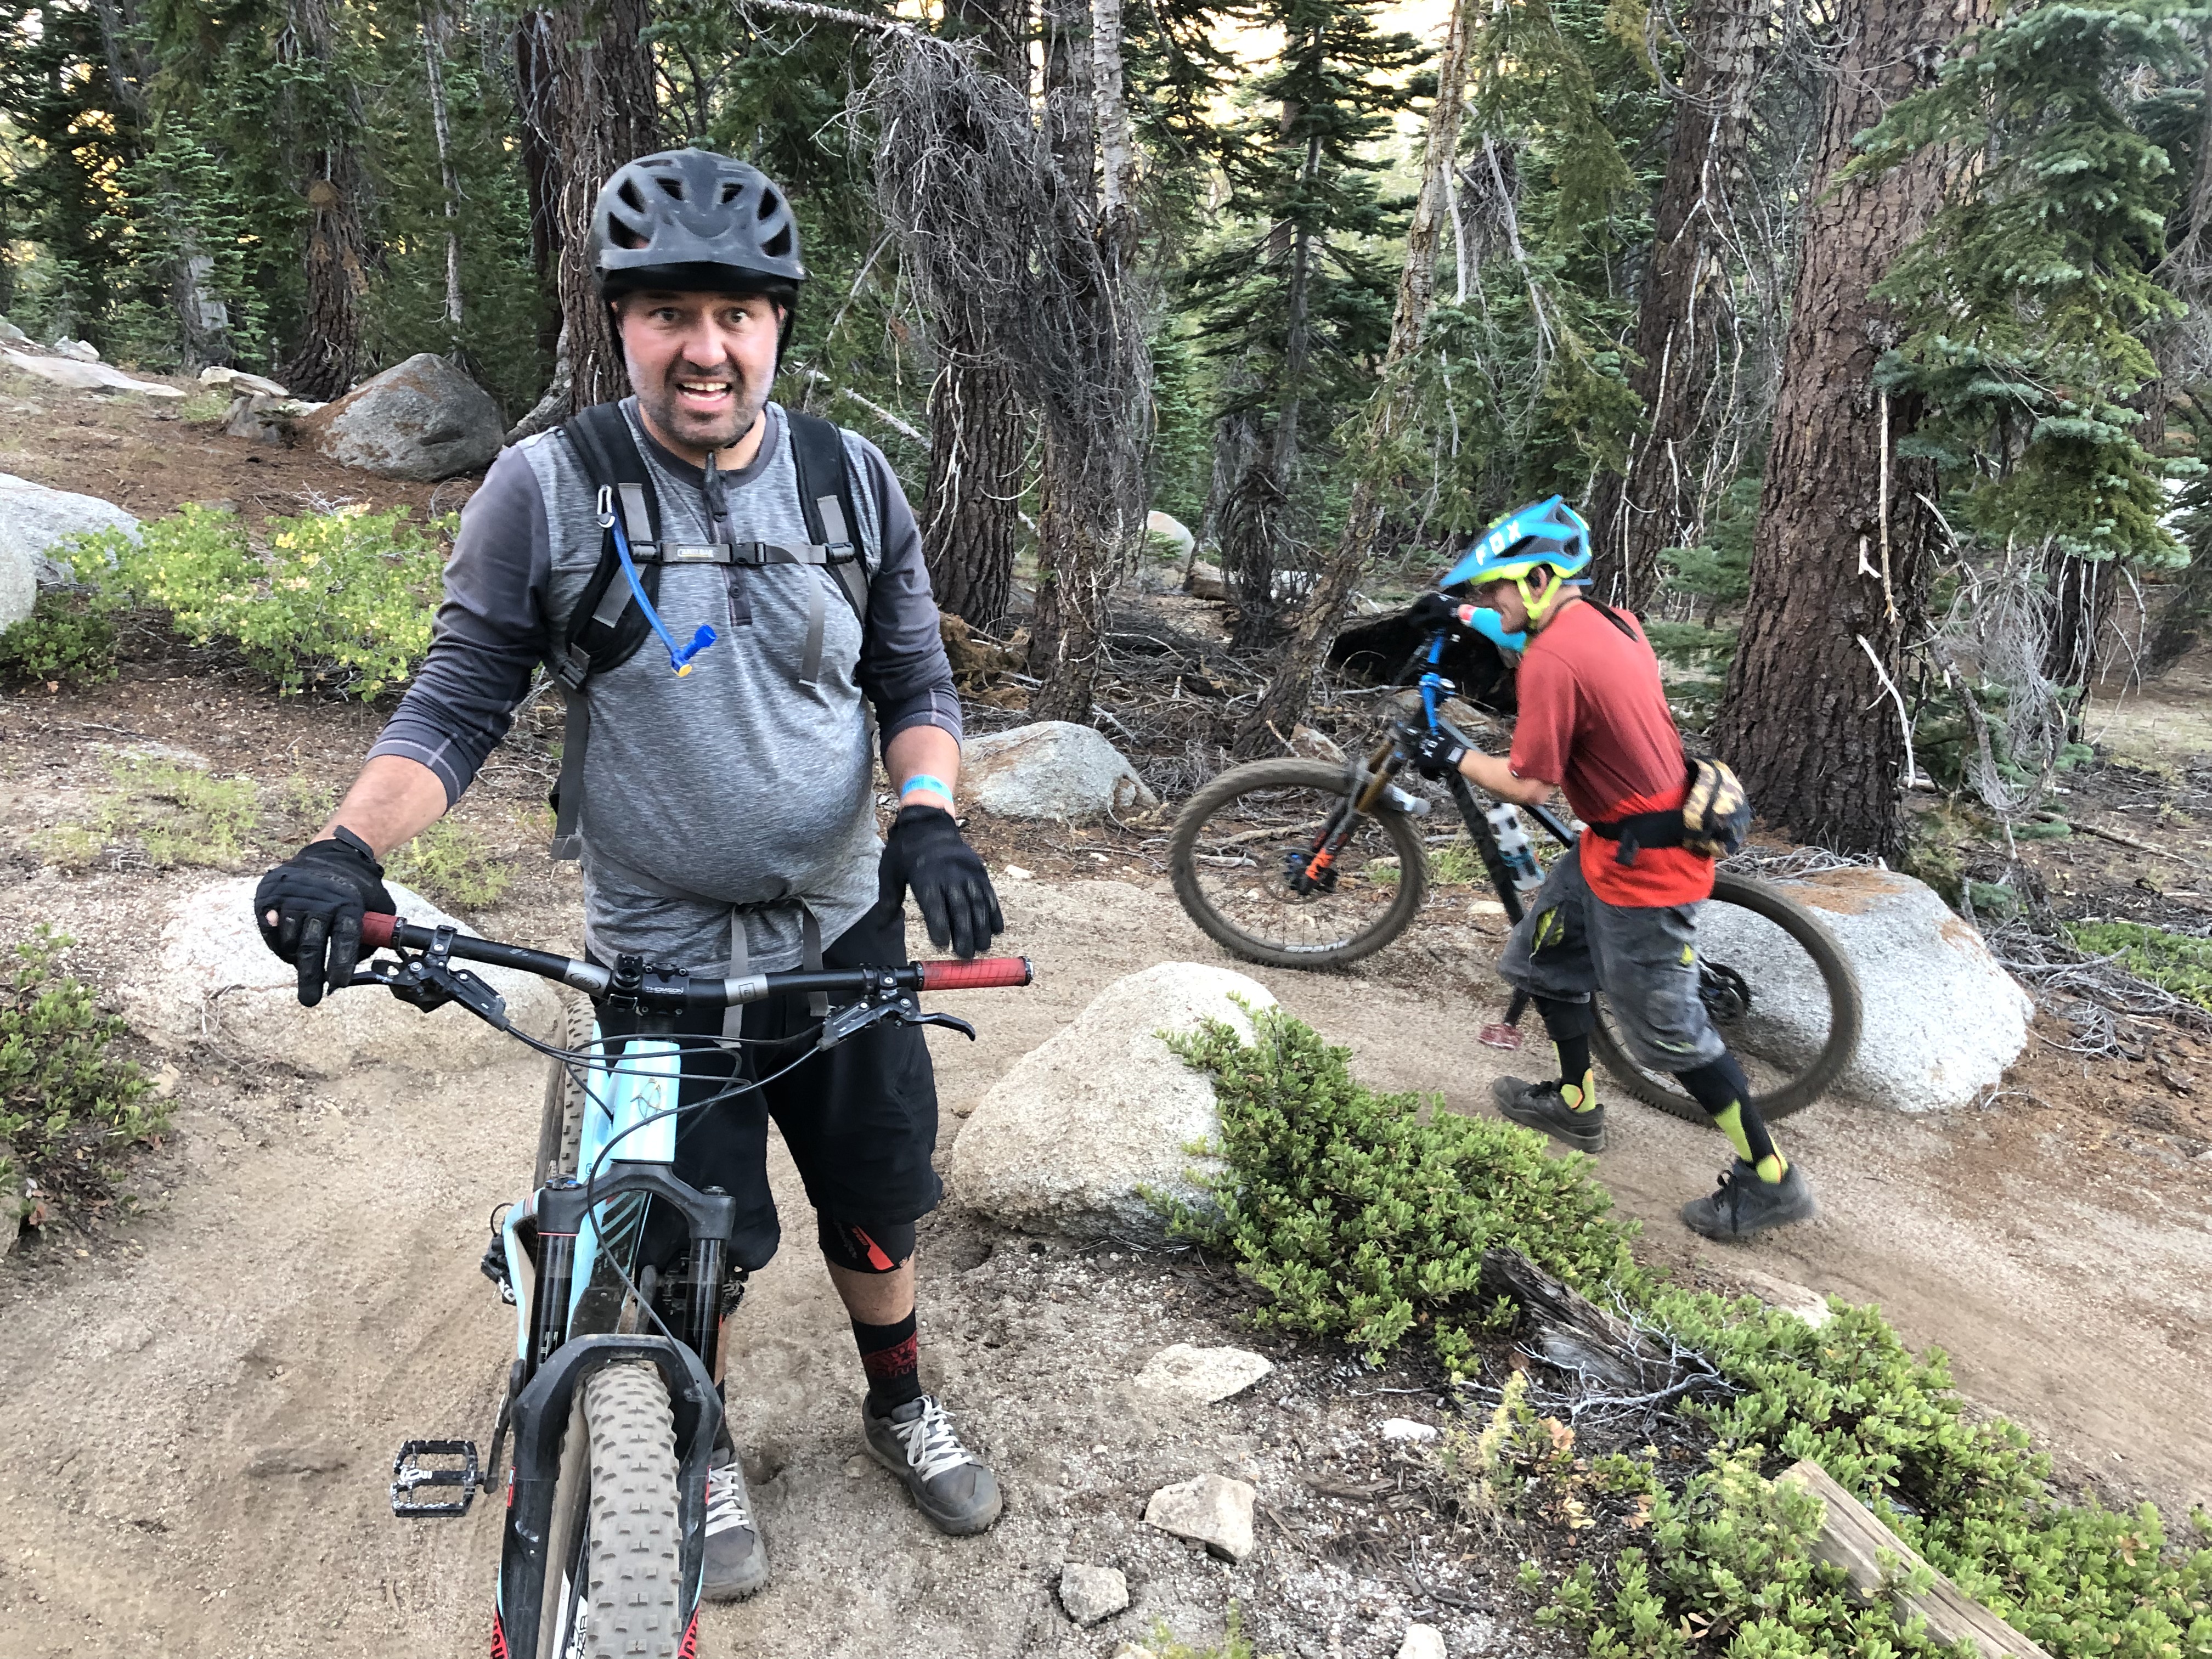 Mountain bikers on the 2019 Rose to Toads race.